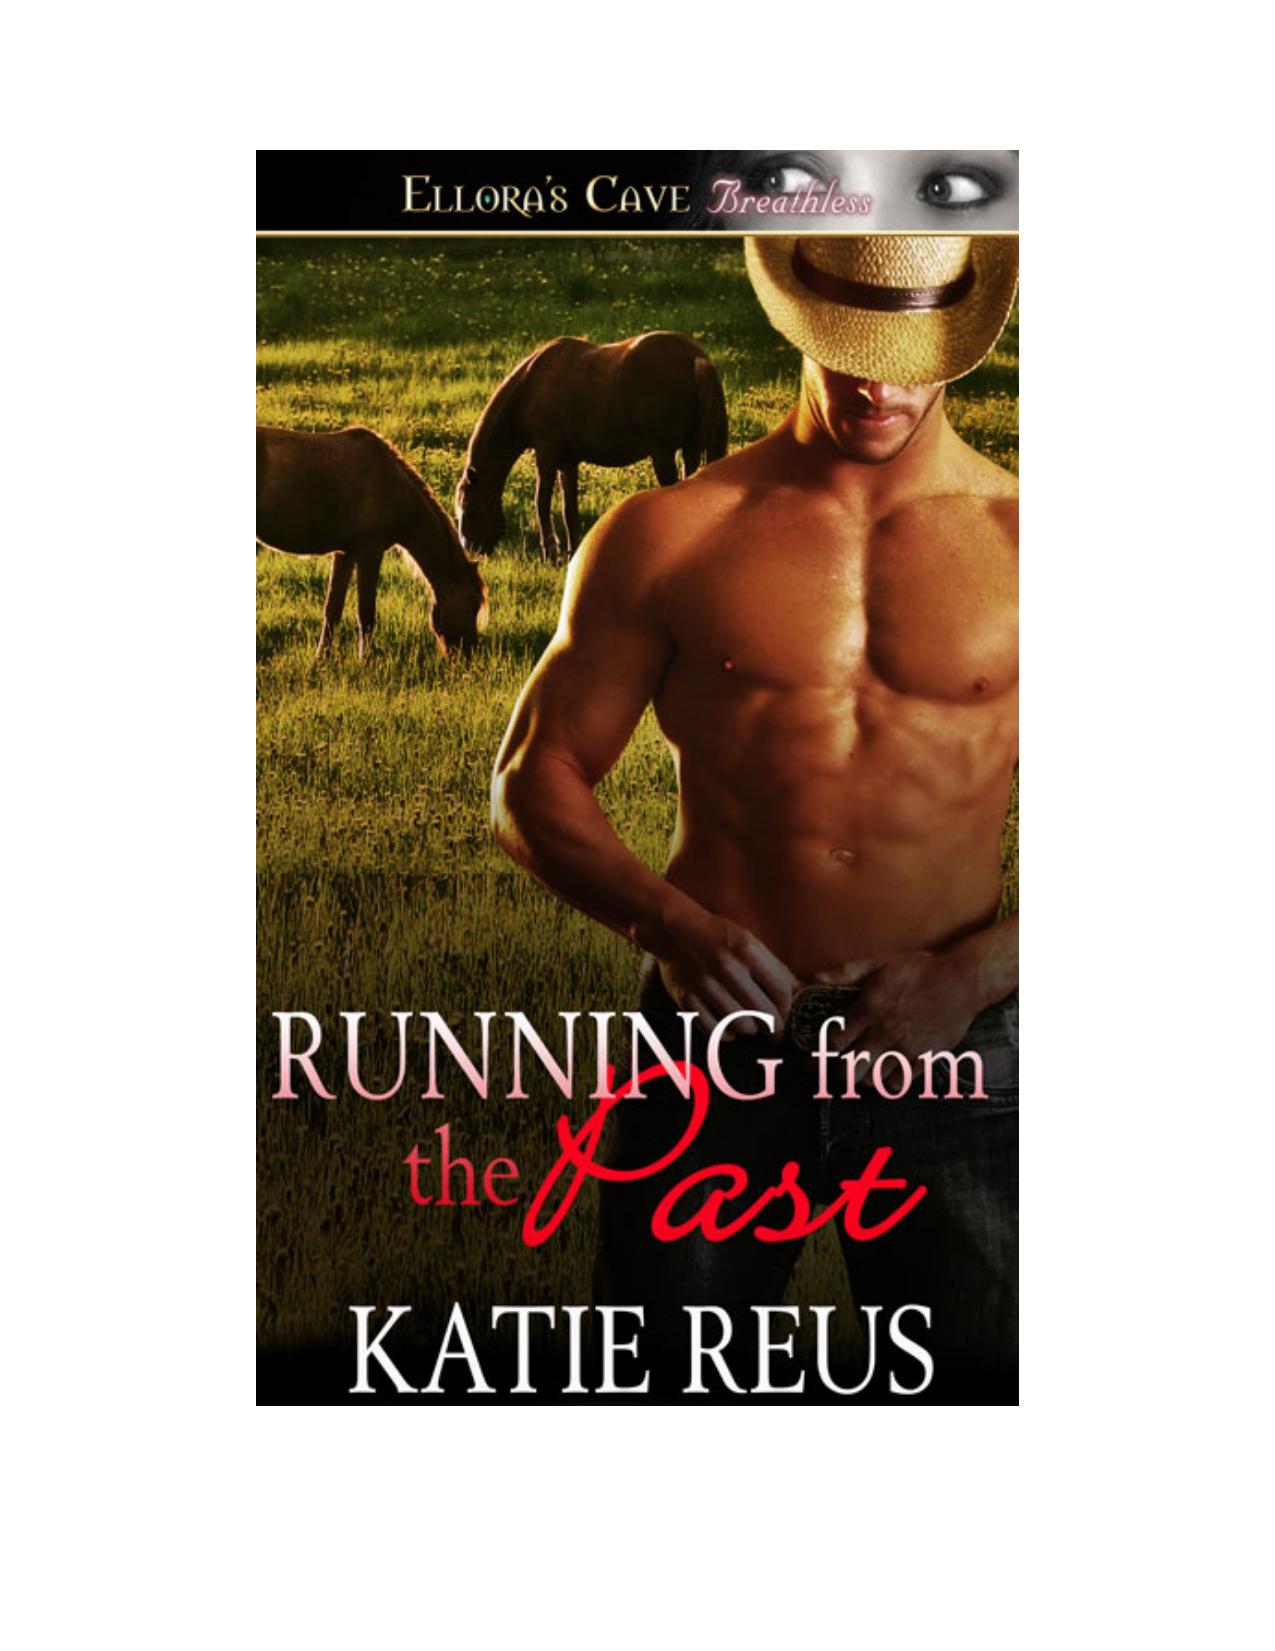 Running From the Past by Katie Reus